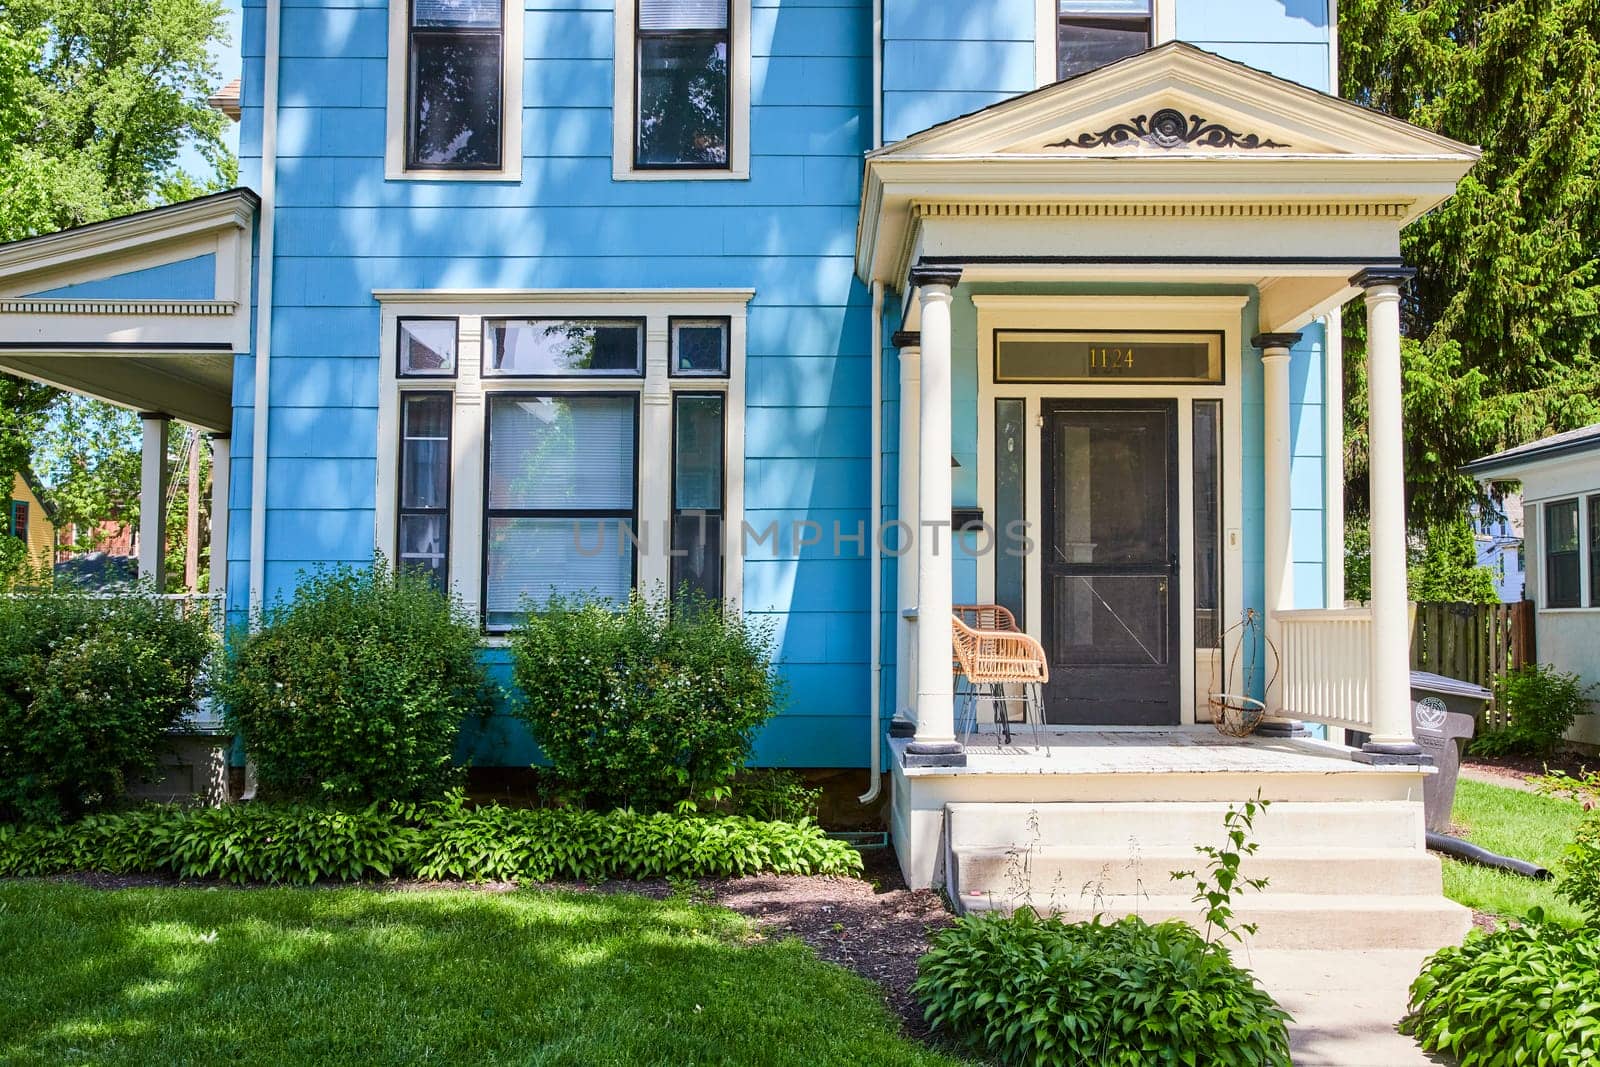 Sunny suburban charm in Fort Wayne: elegant blue home with lush greenery, perfect for a serene lifestyle.